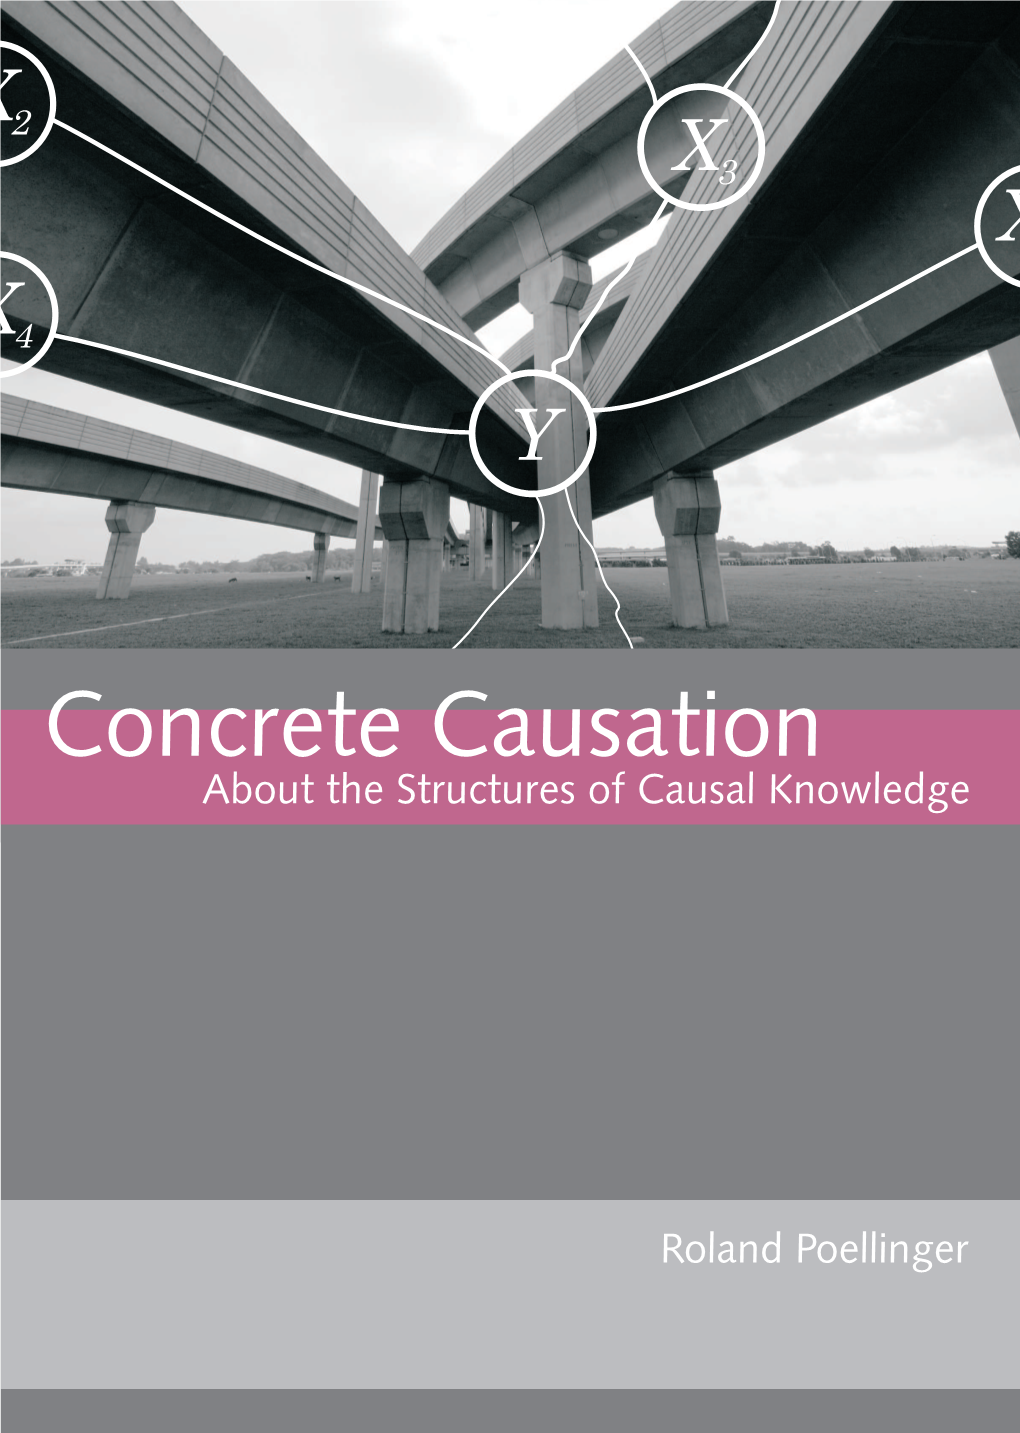 Concrete Causation. About the Structures of Causal Knowledge